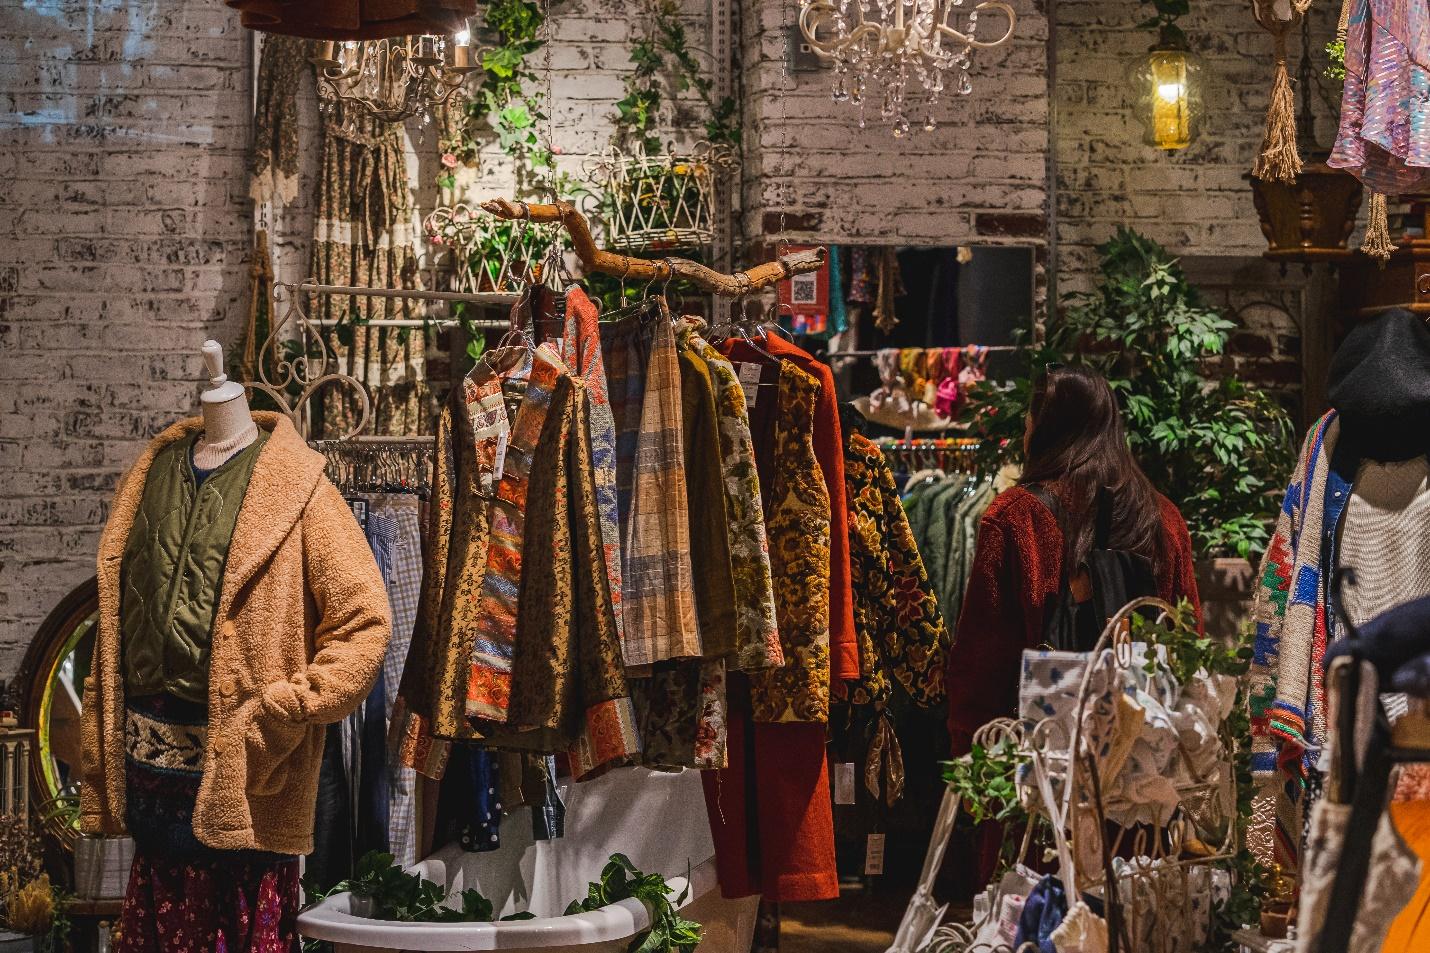 How to Become a Thrift Shopping Pro in 10 Easy Steps